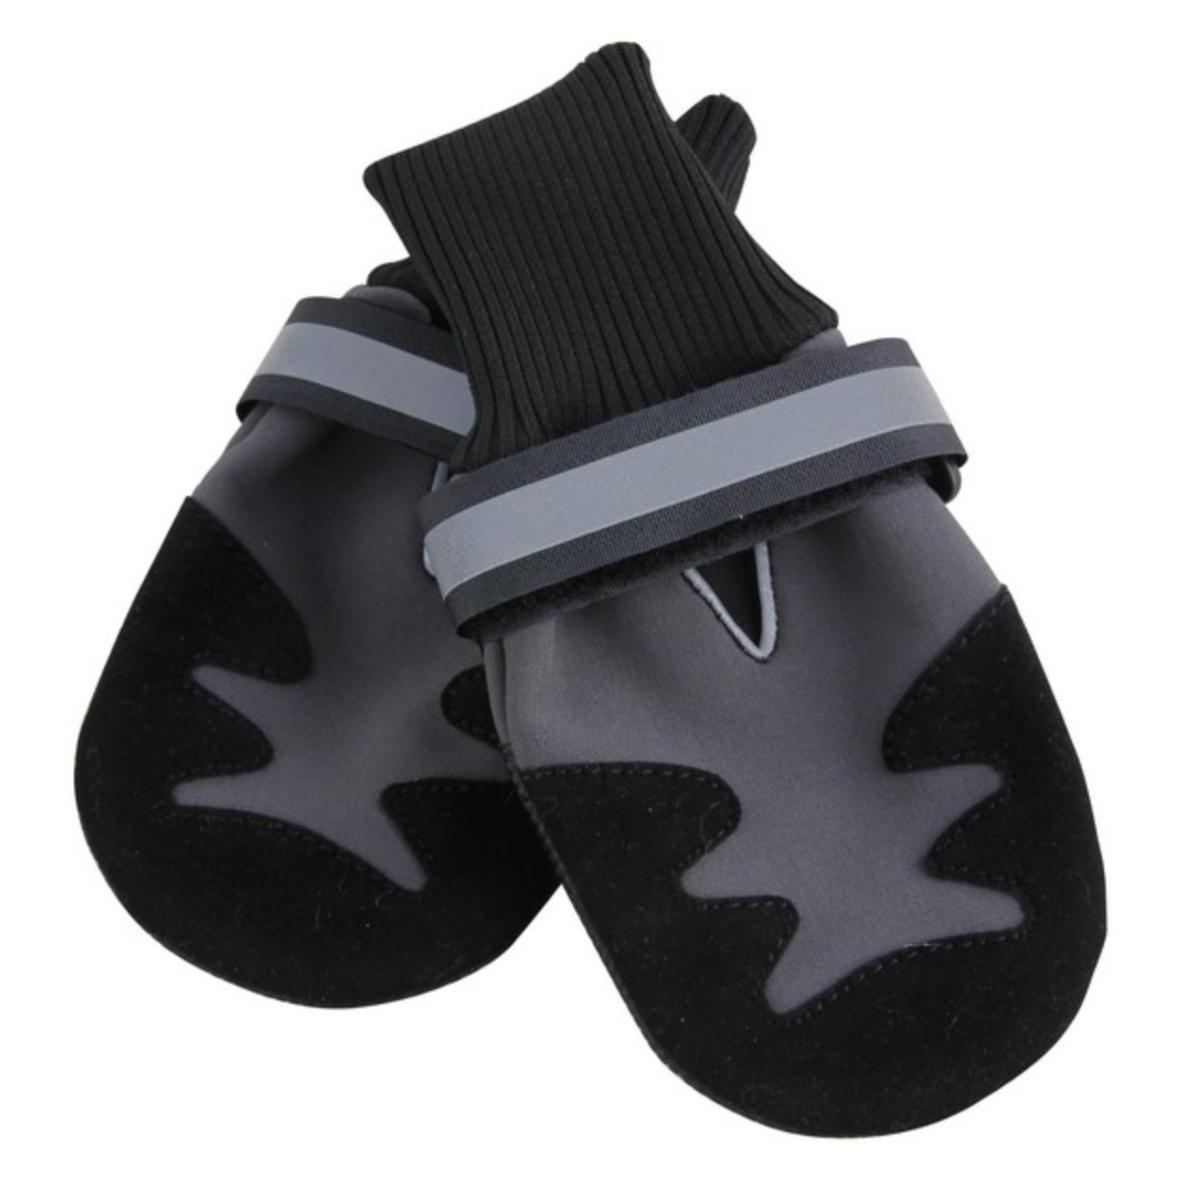 Pawise Doggy Boots | VioVet.co.uk | FREE delivery available